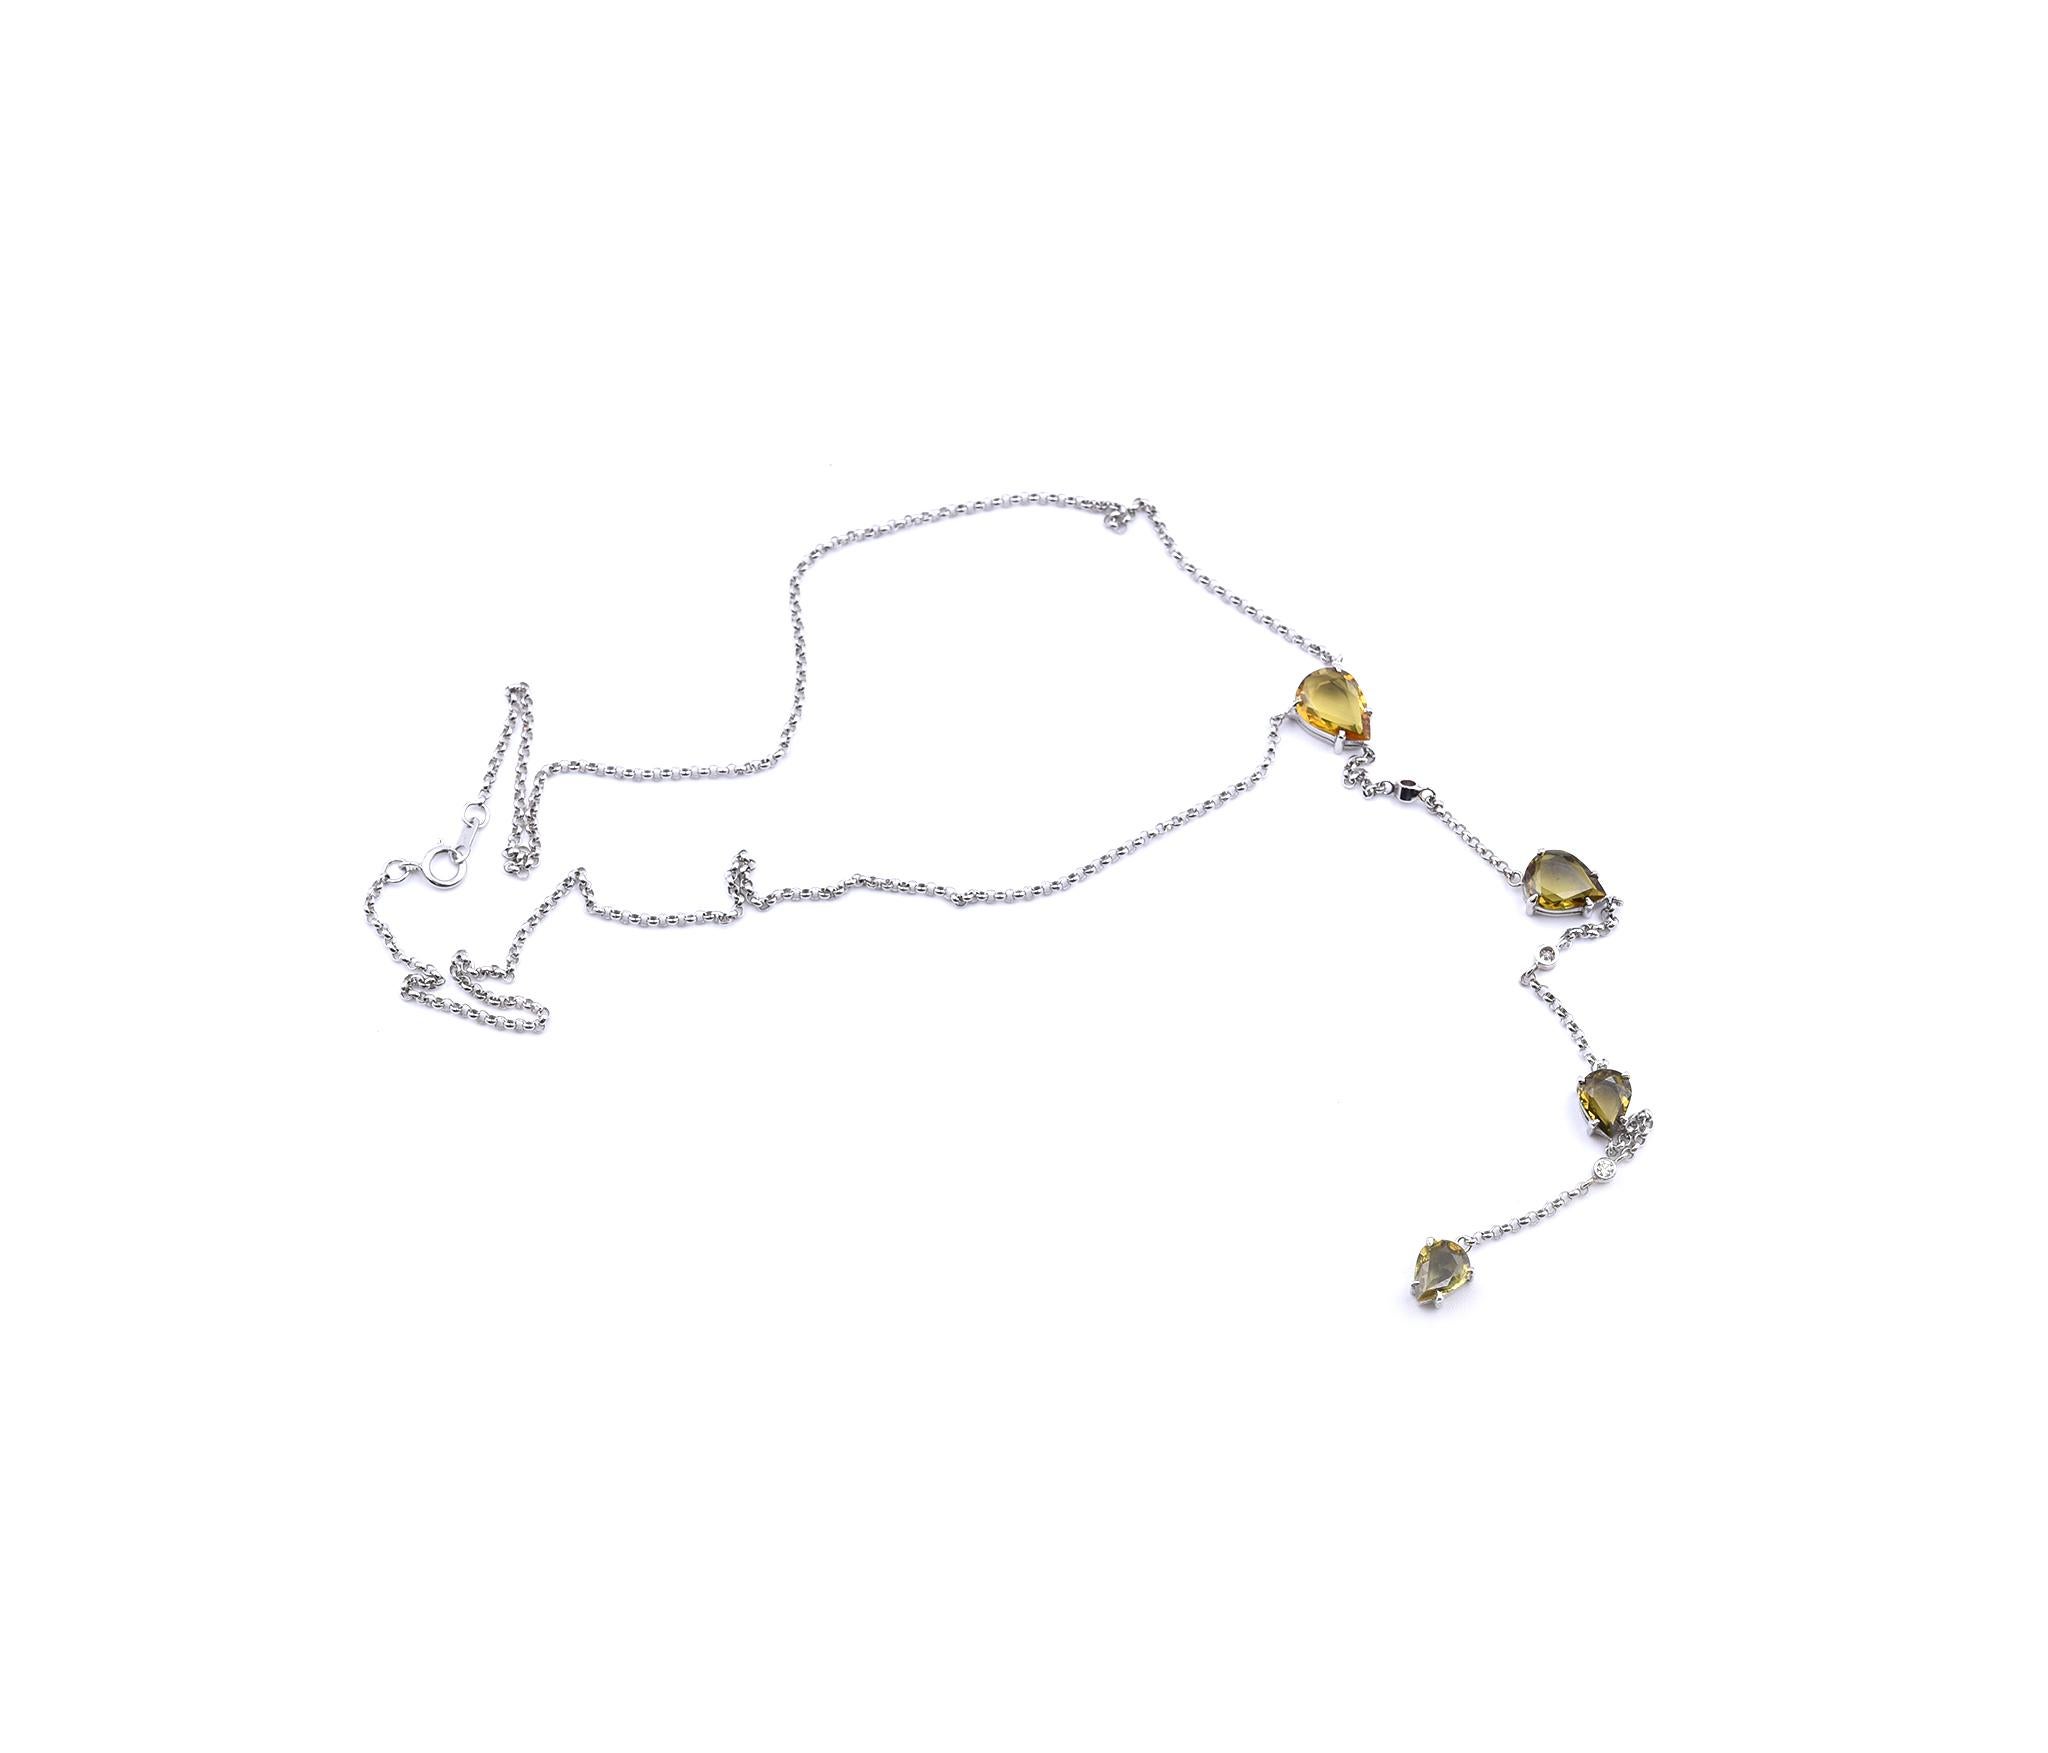 Designer: custom design
Material: 14k white gold
Yellow Thai Sapphire: 4 pear cut= 2.85cttw
Diamonds:  3 round brilliant cut= .05cttw
Color: G
Clarity: VS
Dimensions: necklace is 16-inches long with a 5 ½-inch drop. 
Weight: 5.62 grams